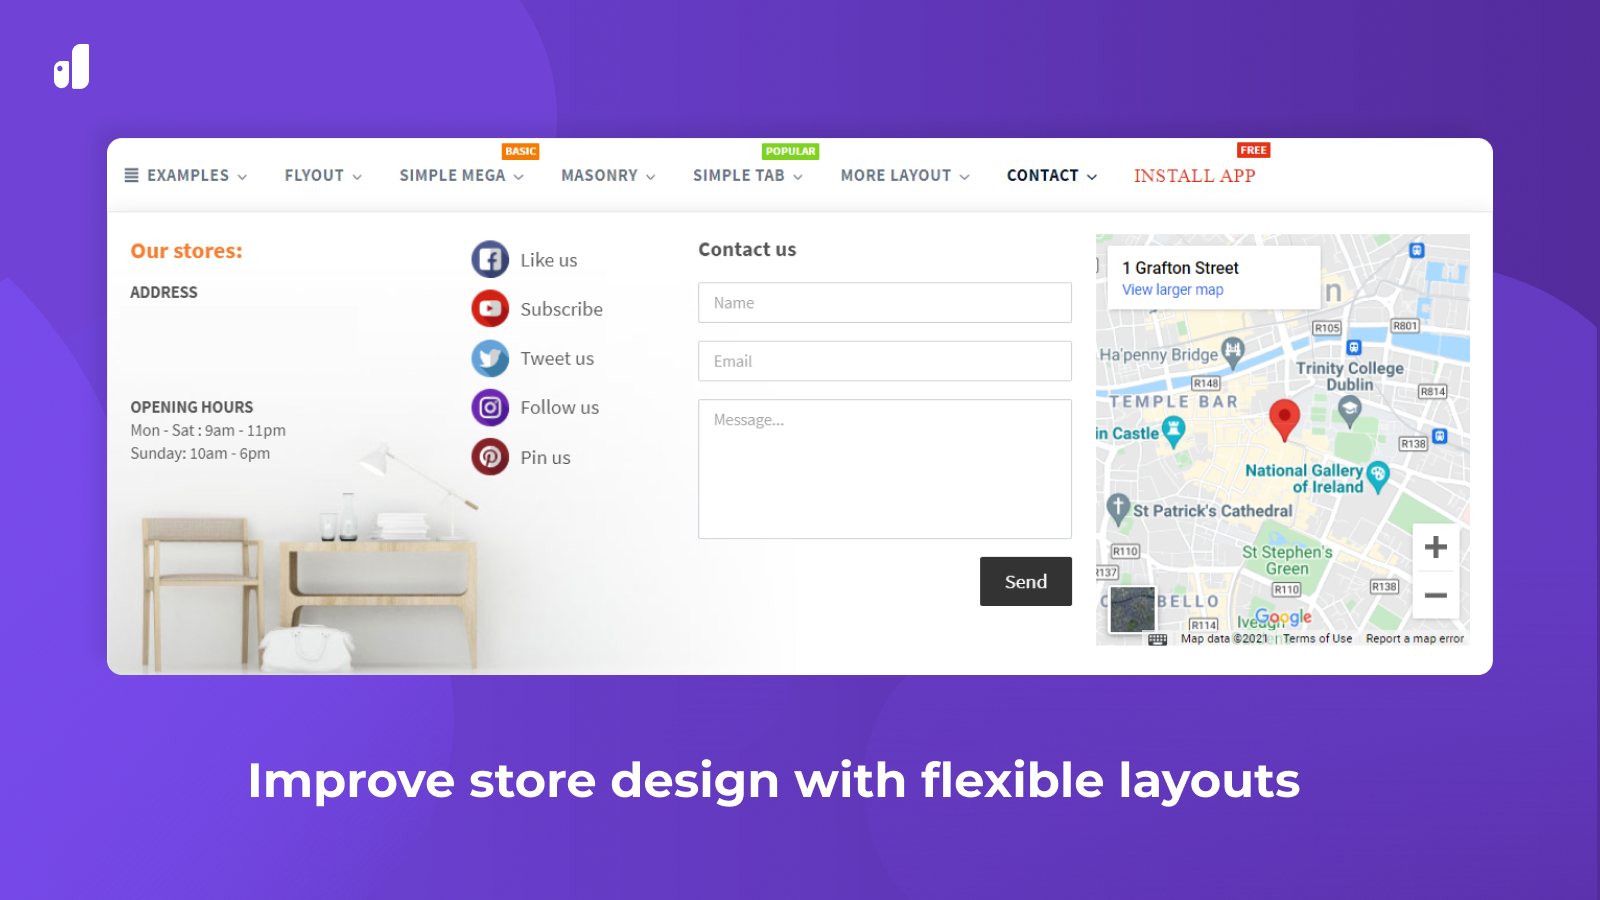 Improve store design with flexible layouts